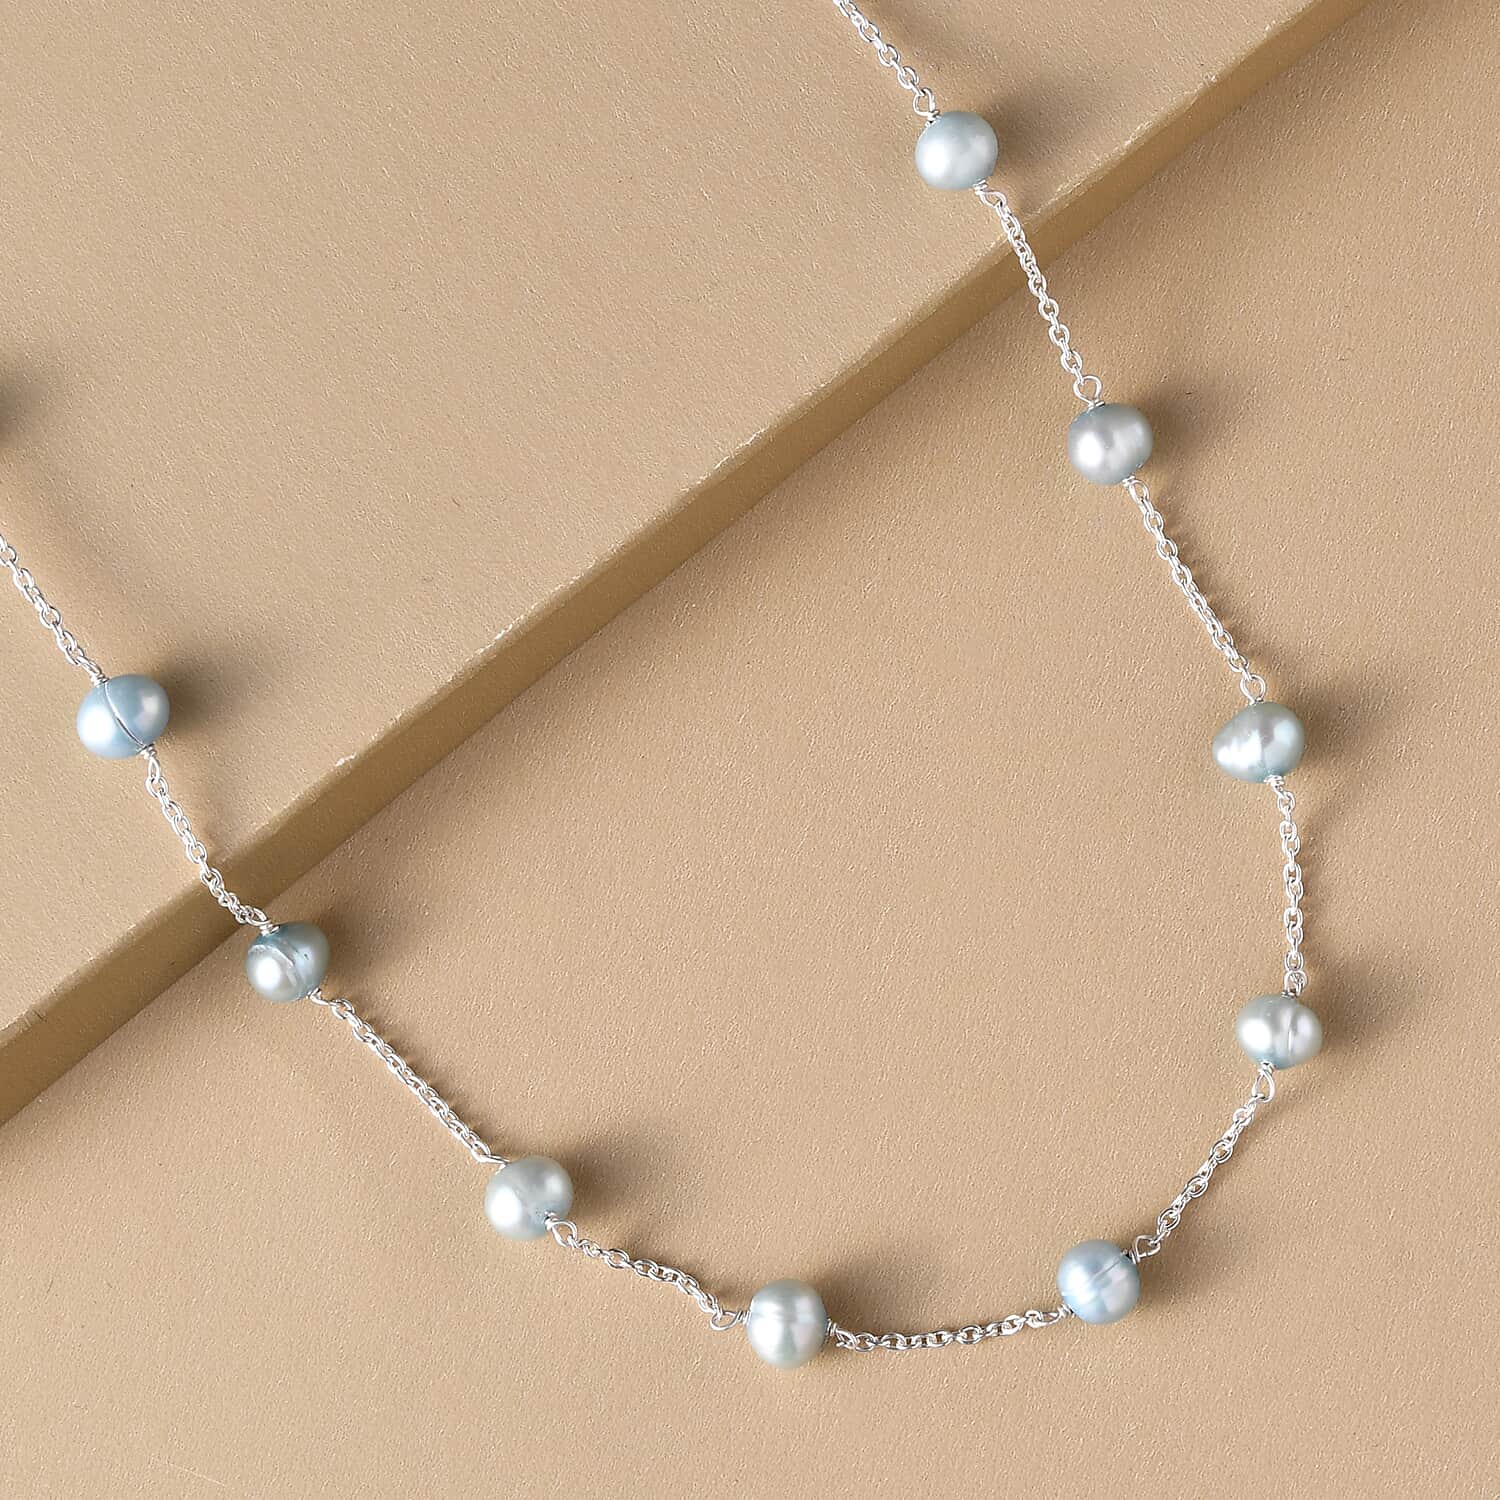 Buy Freshwater Peacock Pearl Station Necklace For Women in 925